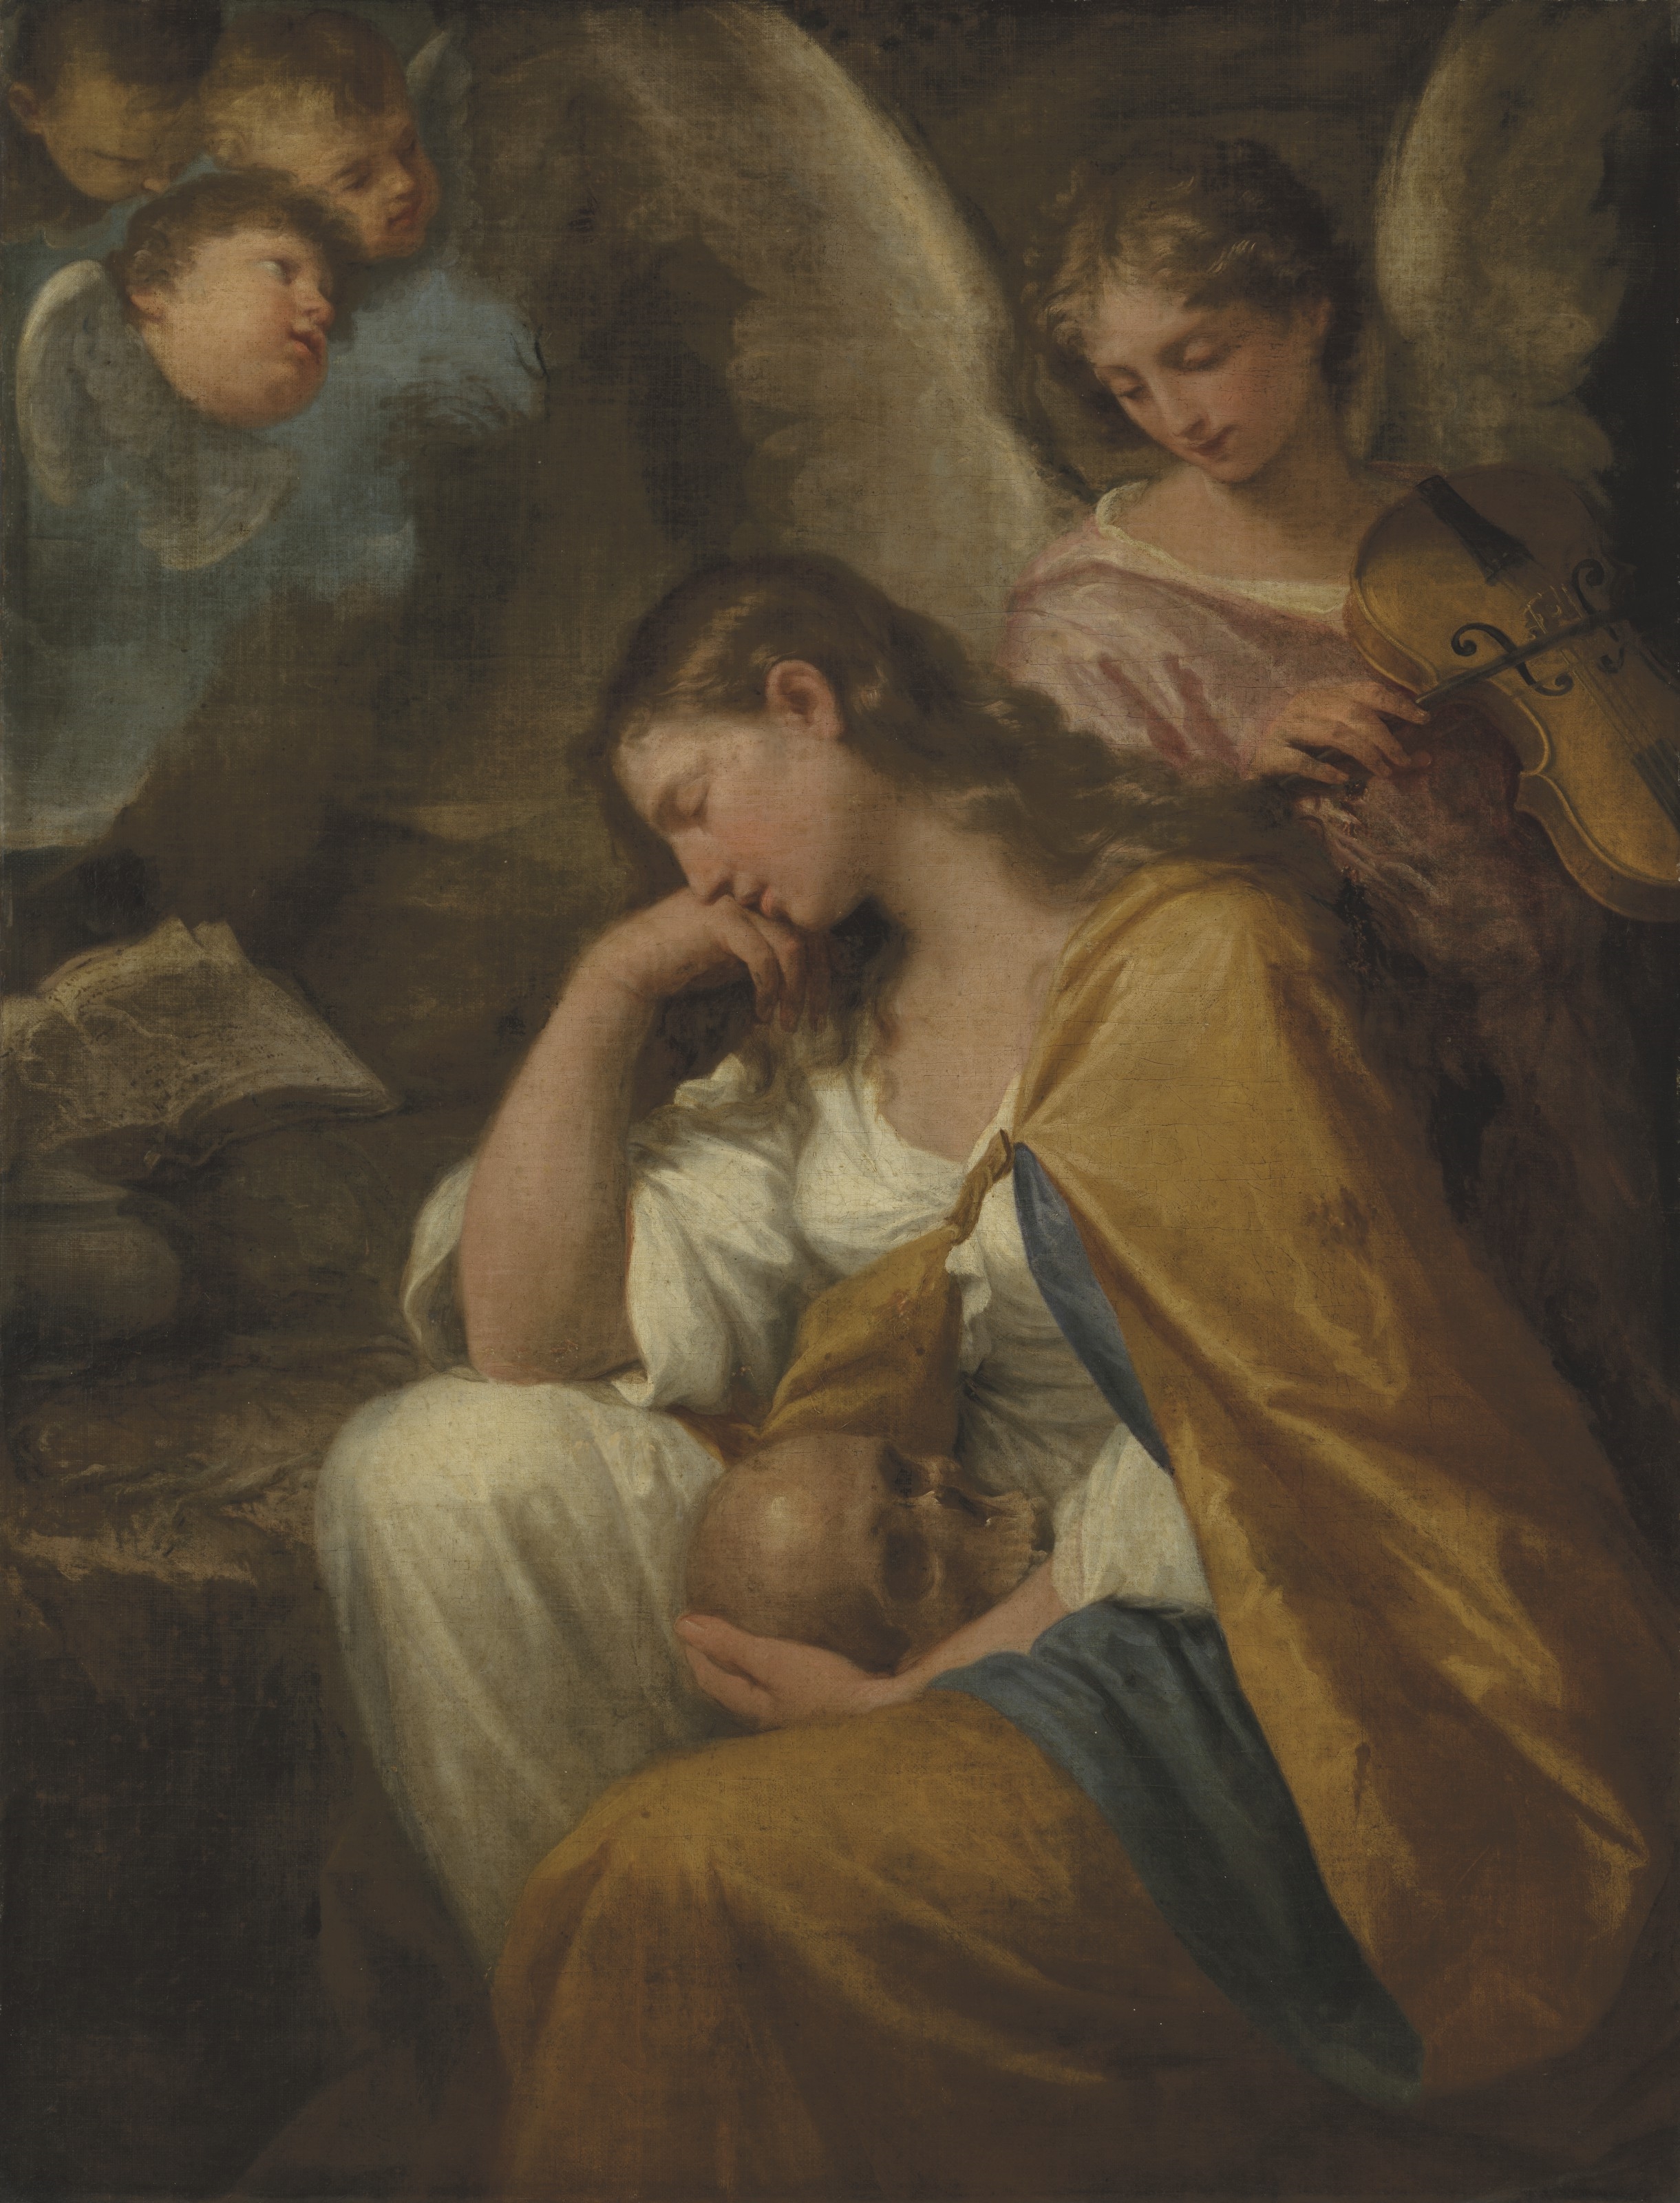 Saint Mary Magdalene in meditation with angels by Lorenzo Pasinelli